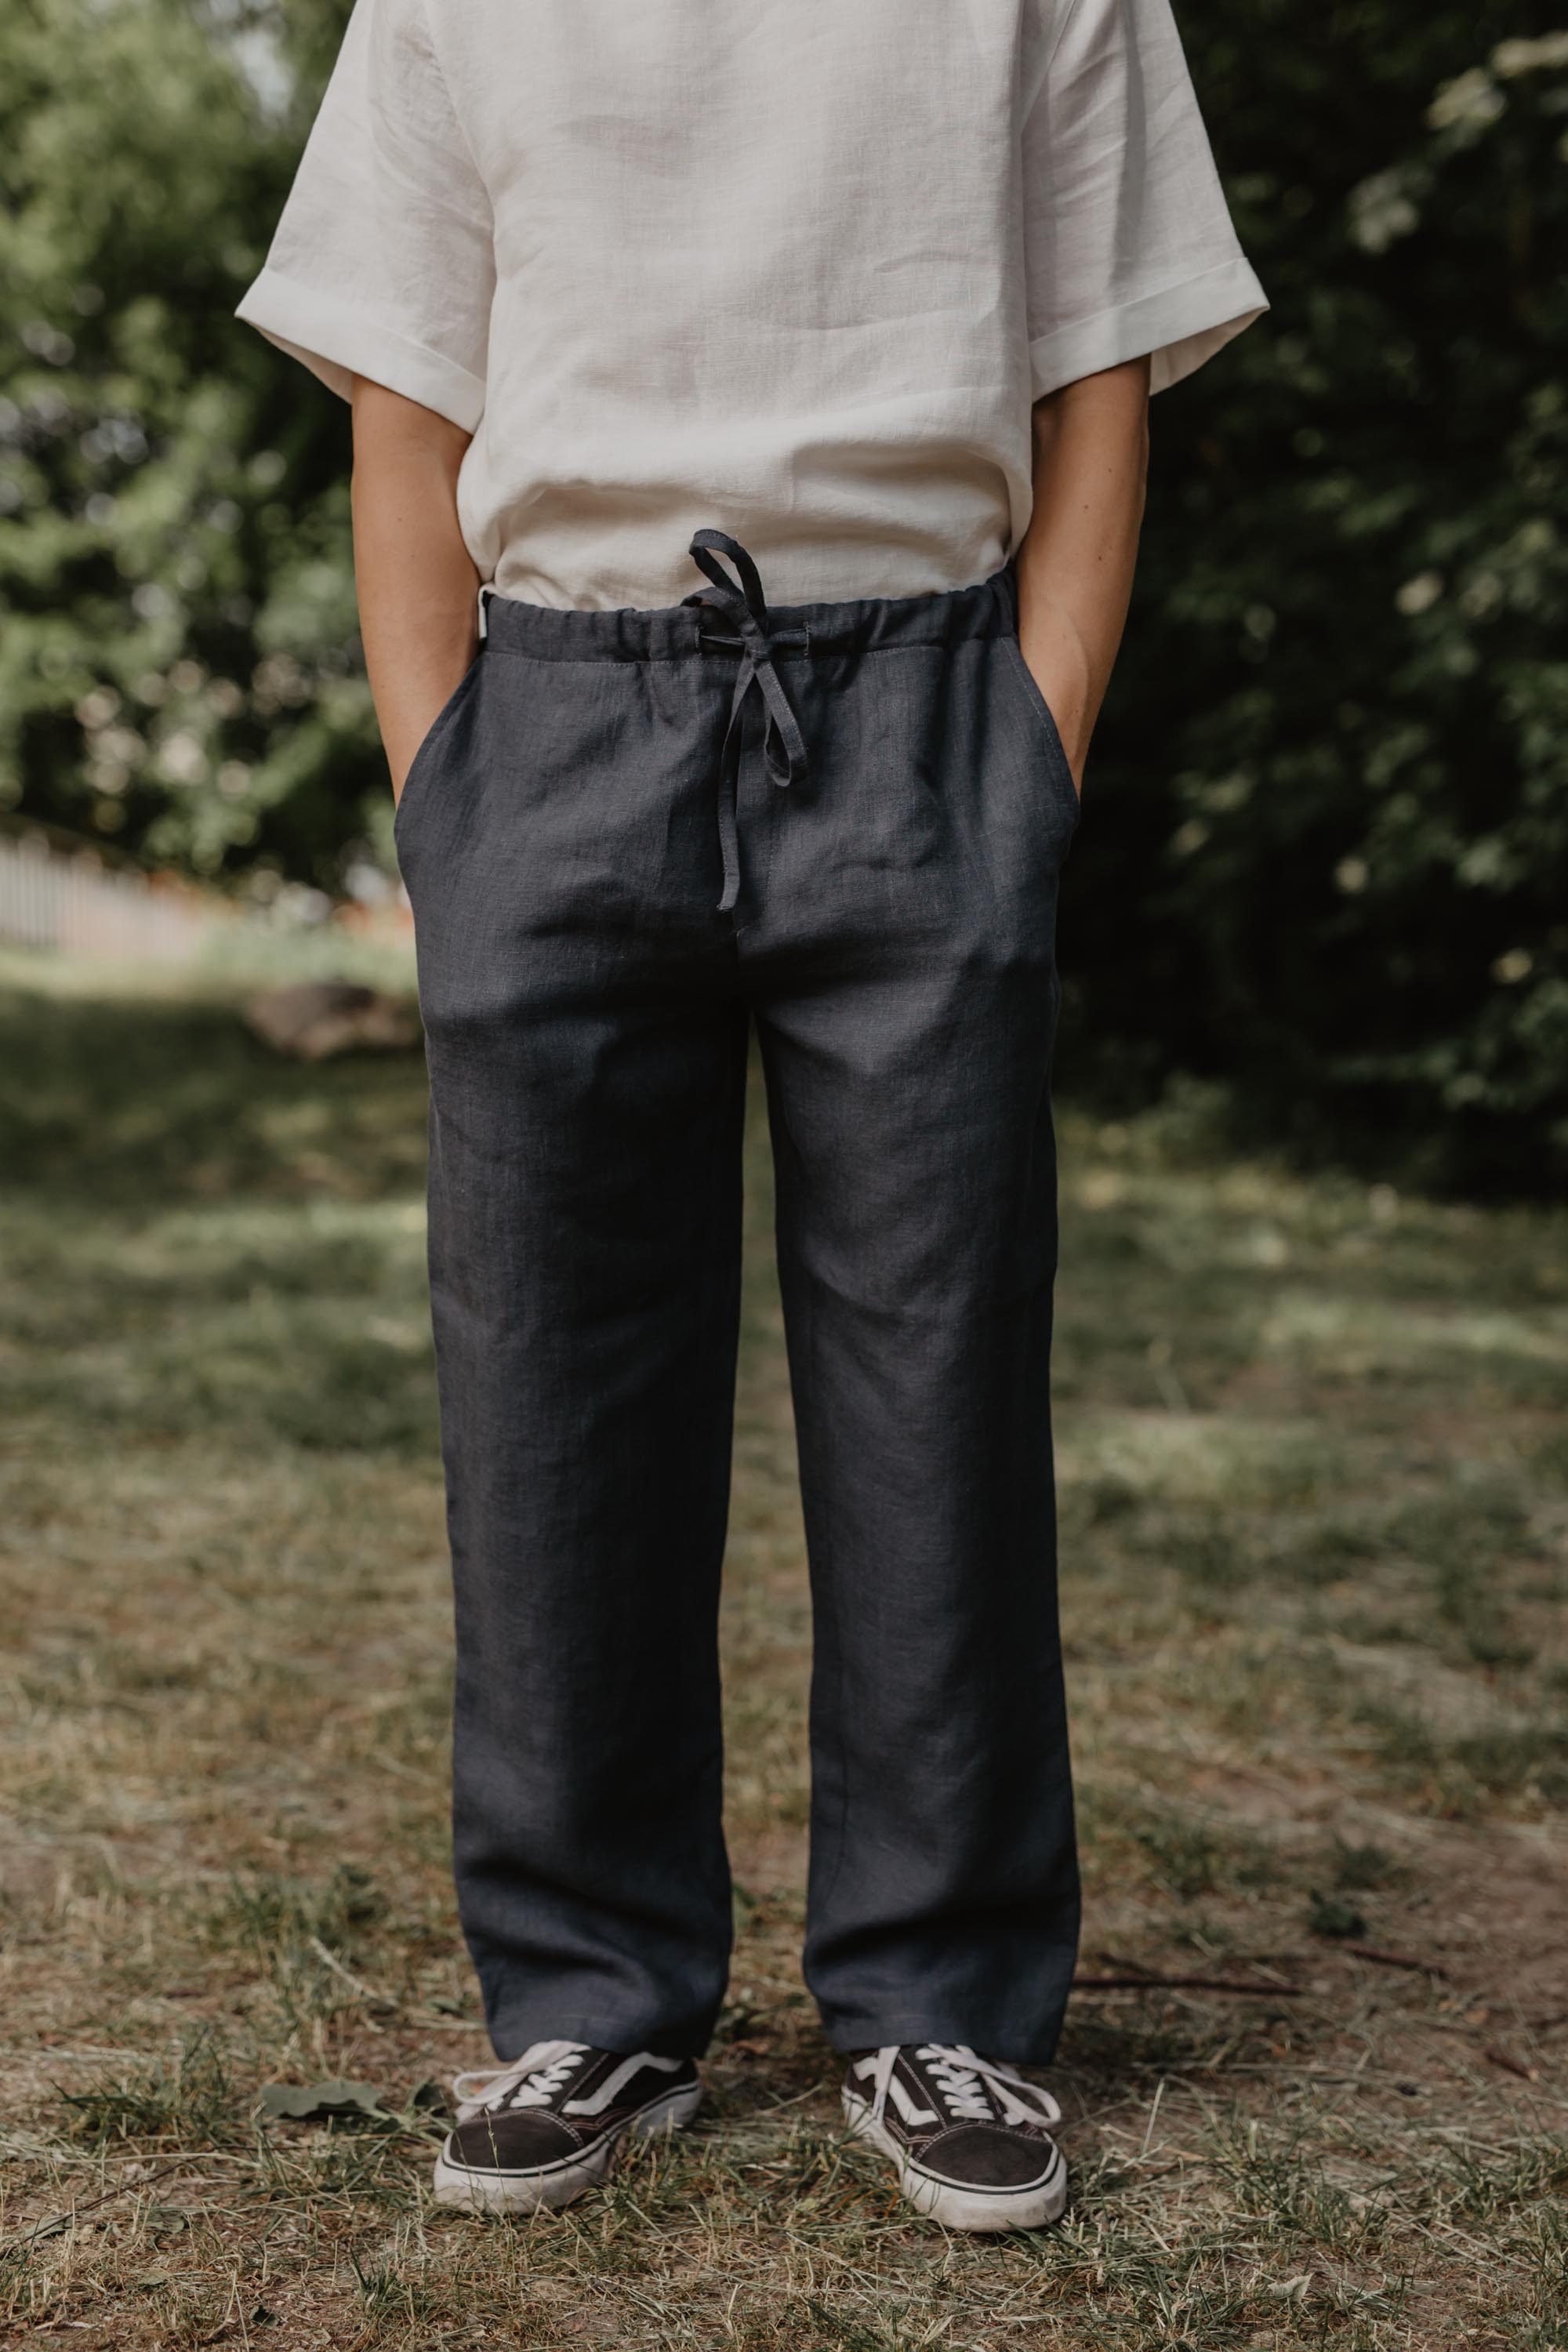 Black Linen Pants With White T shirt In Nature